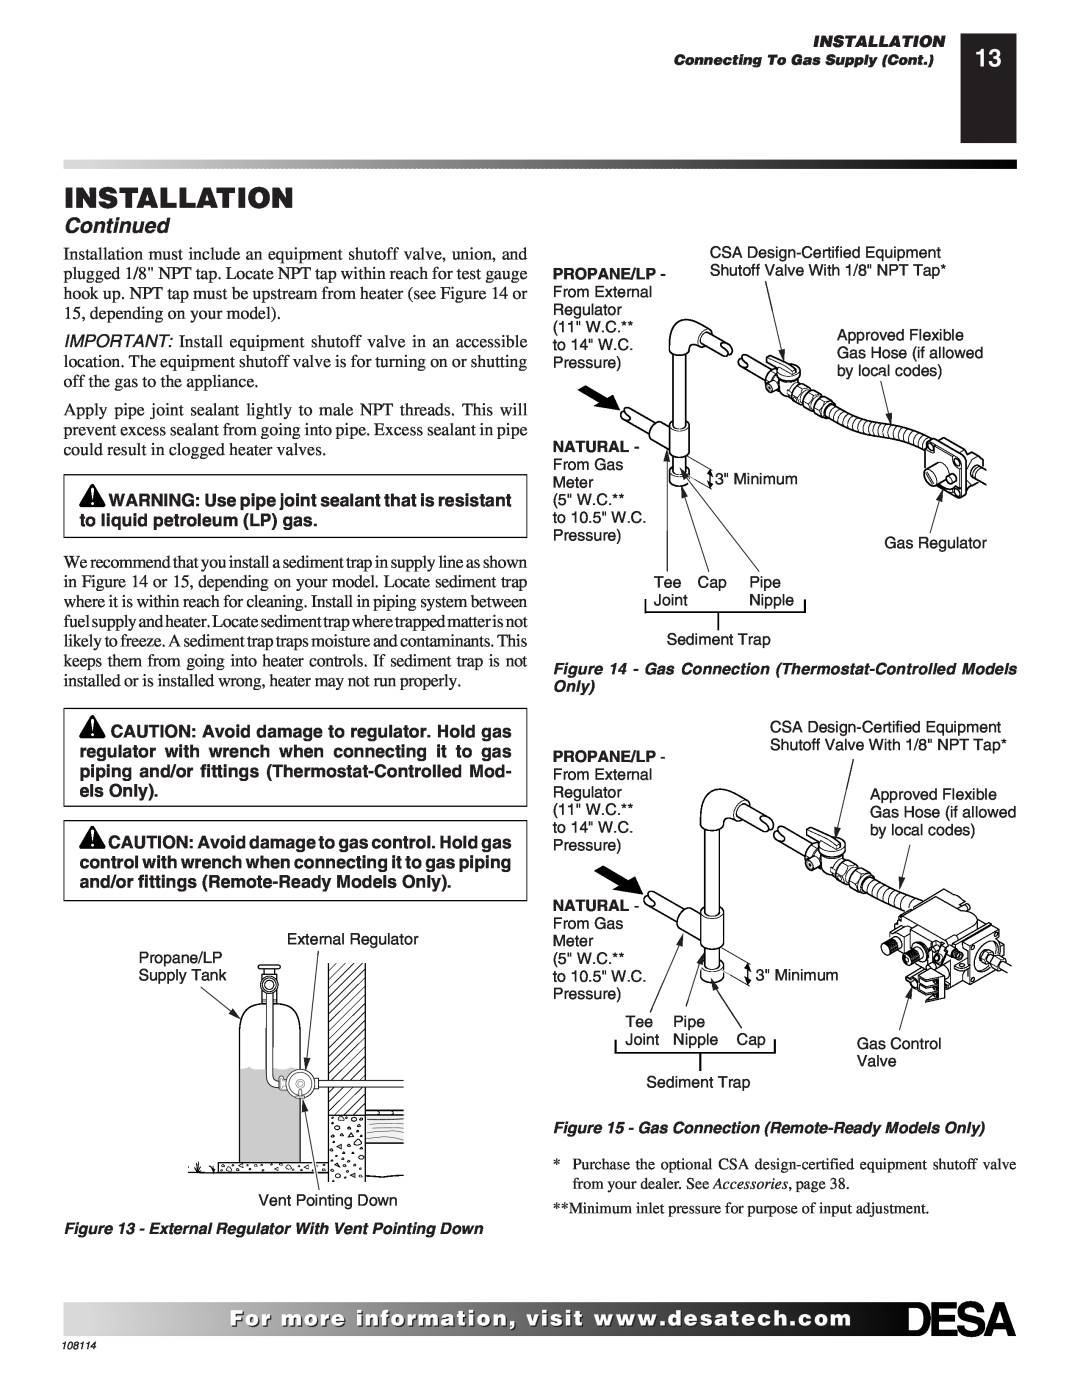 Desa INTERNATIONAL UNVENTED (VENT-FREE) GAS LOG HEATER installation manual Installation, Continued, Propane/Lp, Natural 